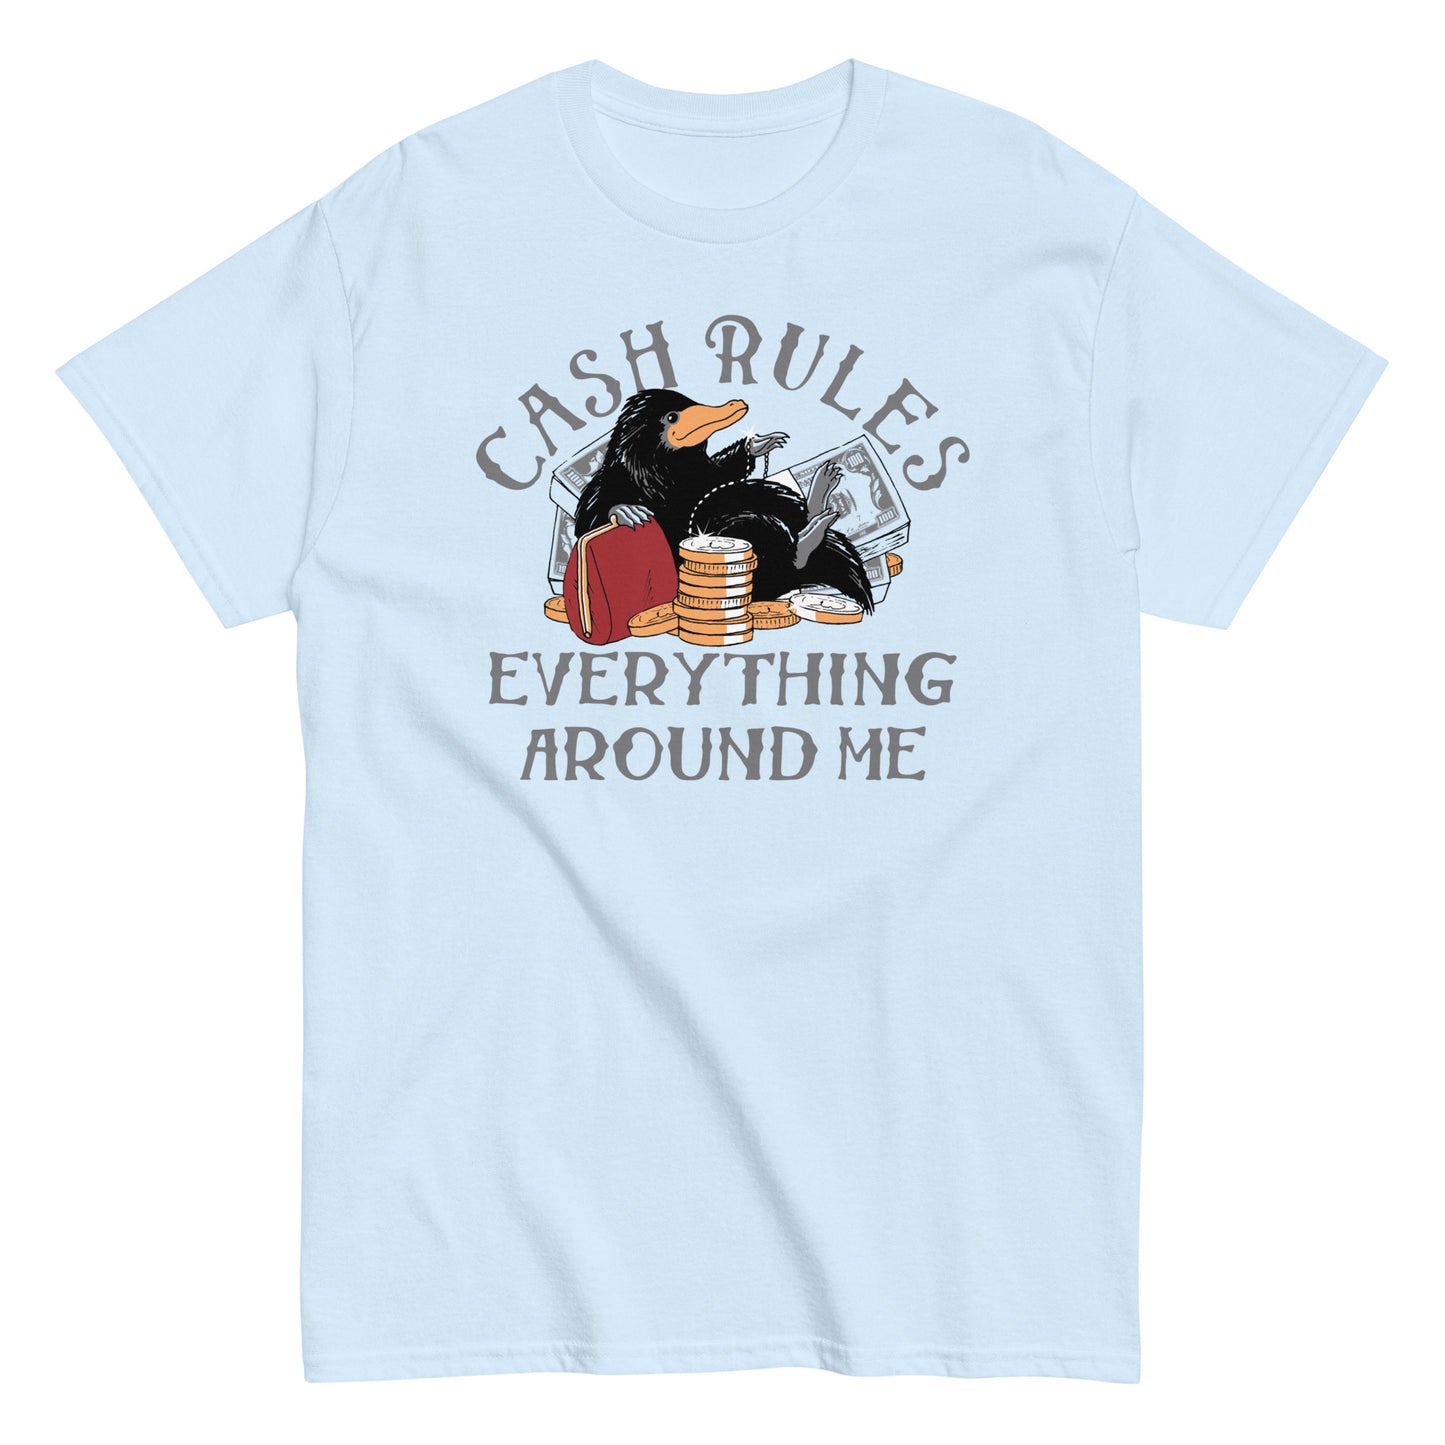 Cash Rules Everything Around Me Men's Classic Tee